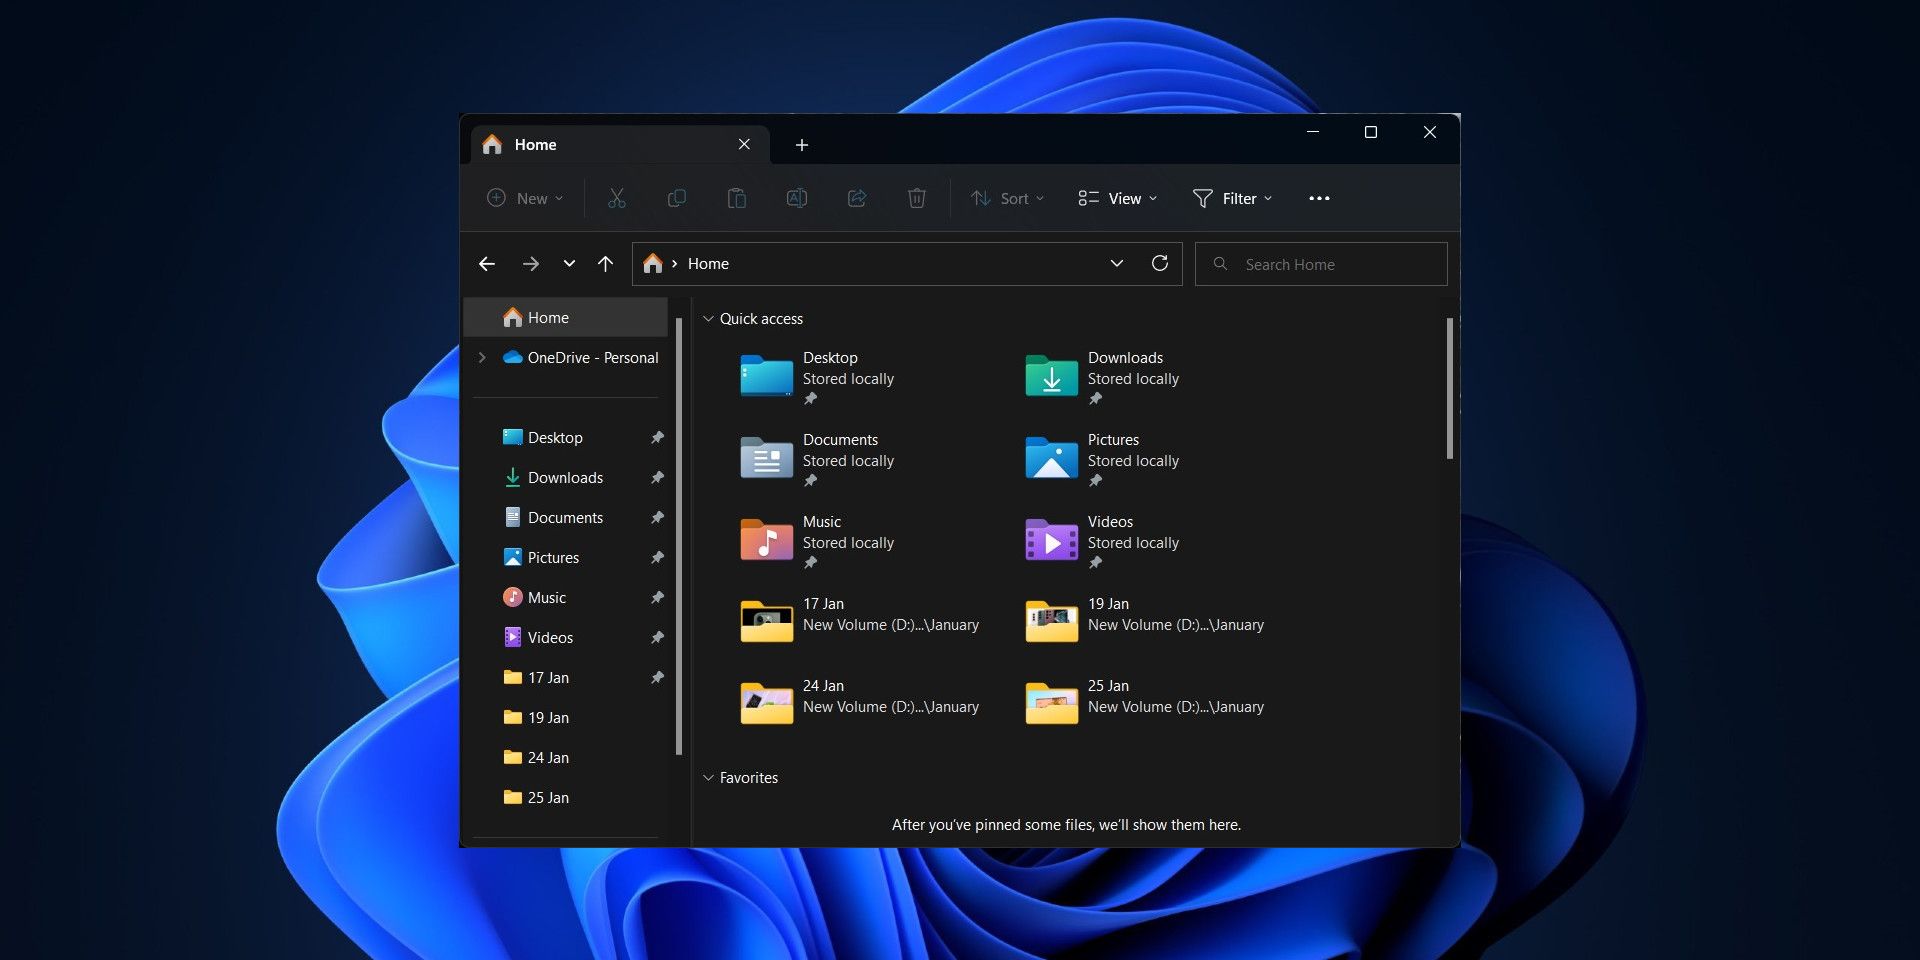 Revamped Windows 11 File Explorer Could Integrate Microsoft 365 & OneDrive